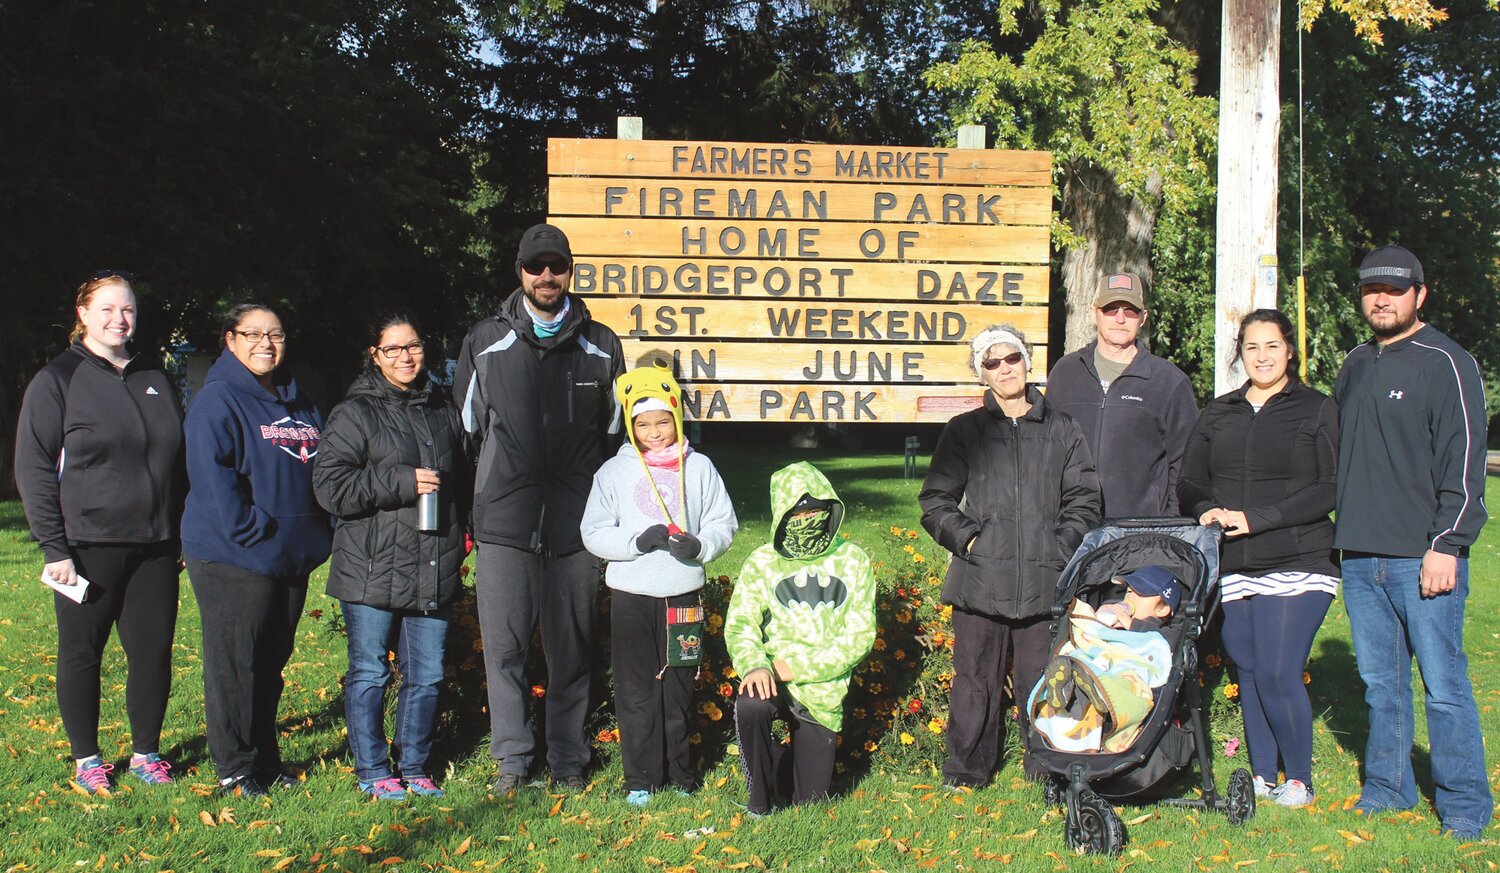 Nearly a dozen hardy walkers braved the nippy morning temperature to meet at Fireman Park and participate in a two-mile community walk sponsored by Three Rivers Hospital in Bridgeport.